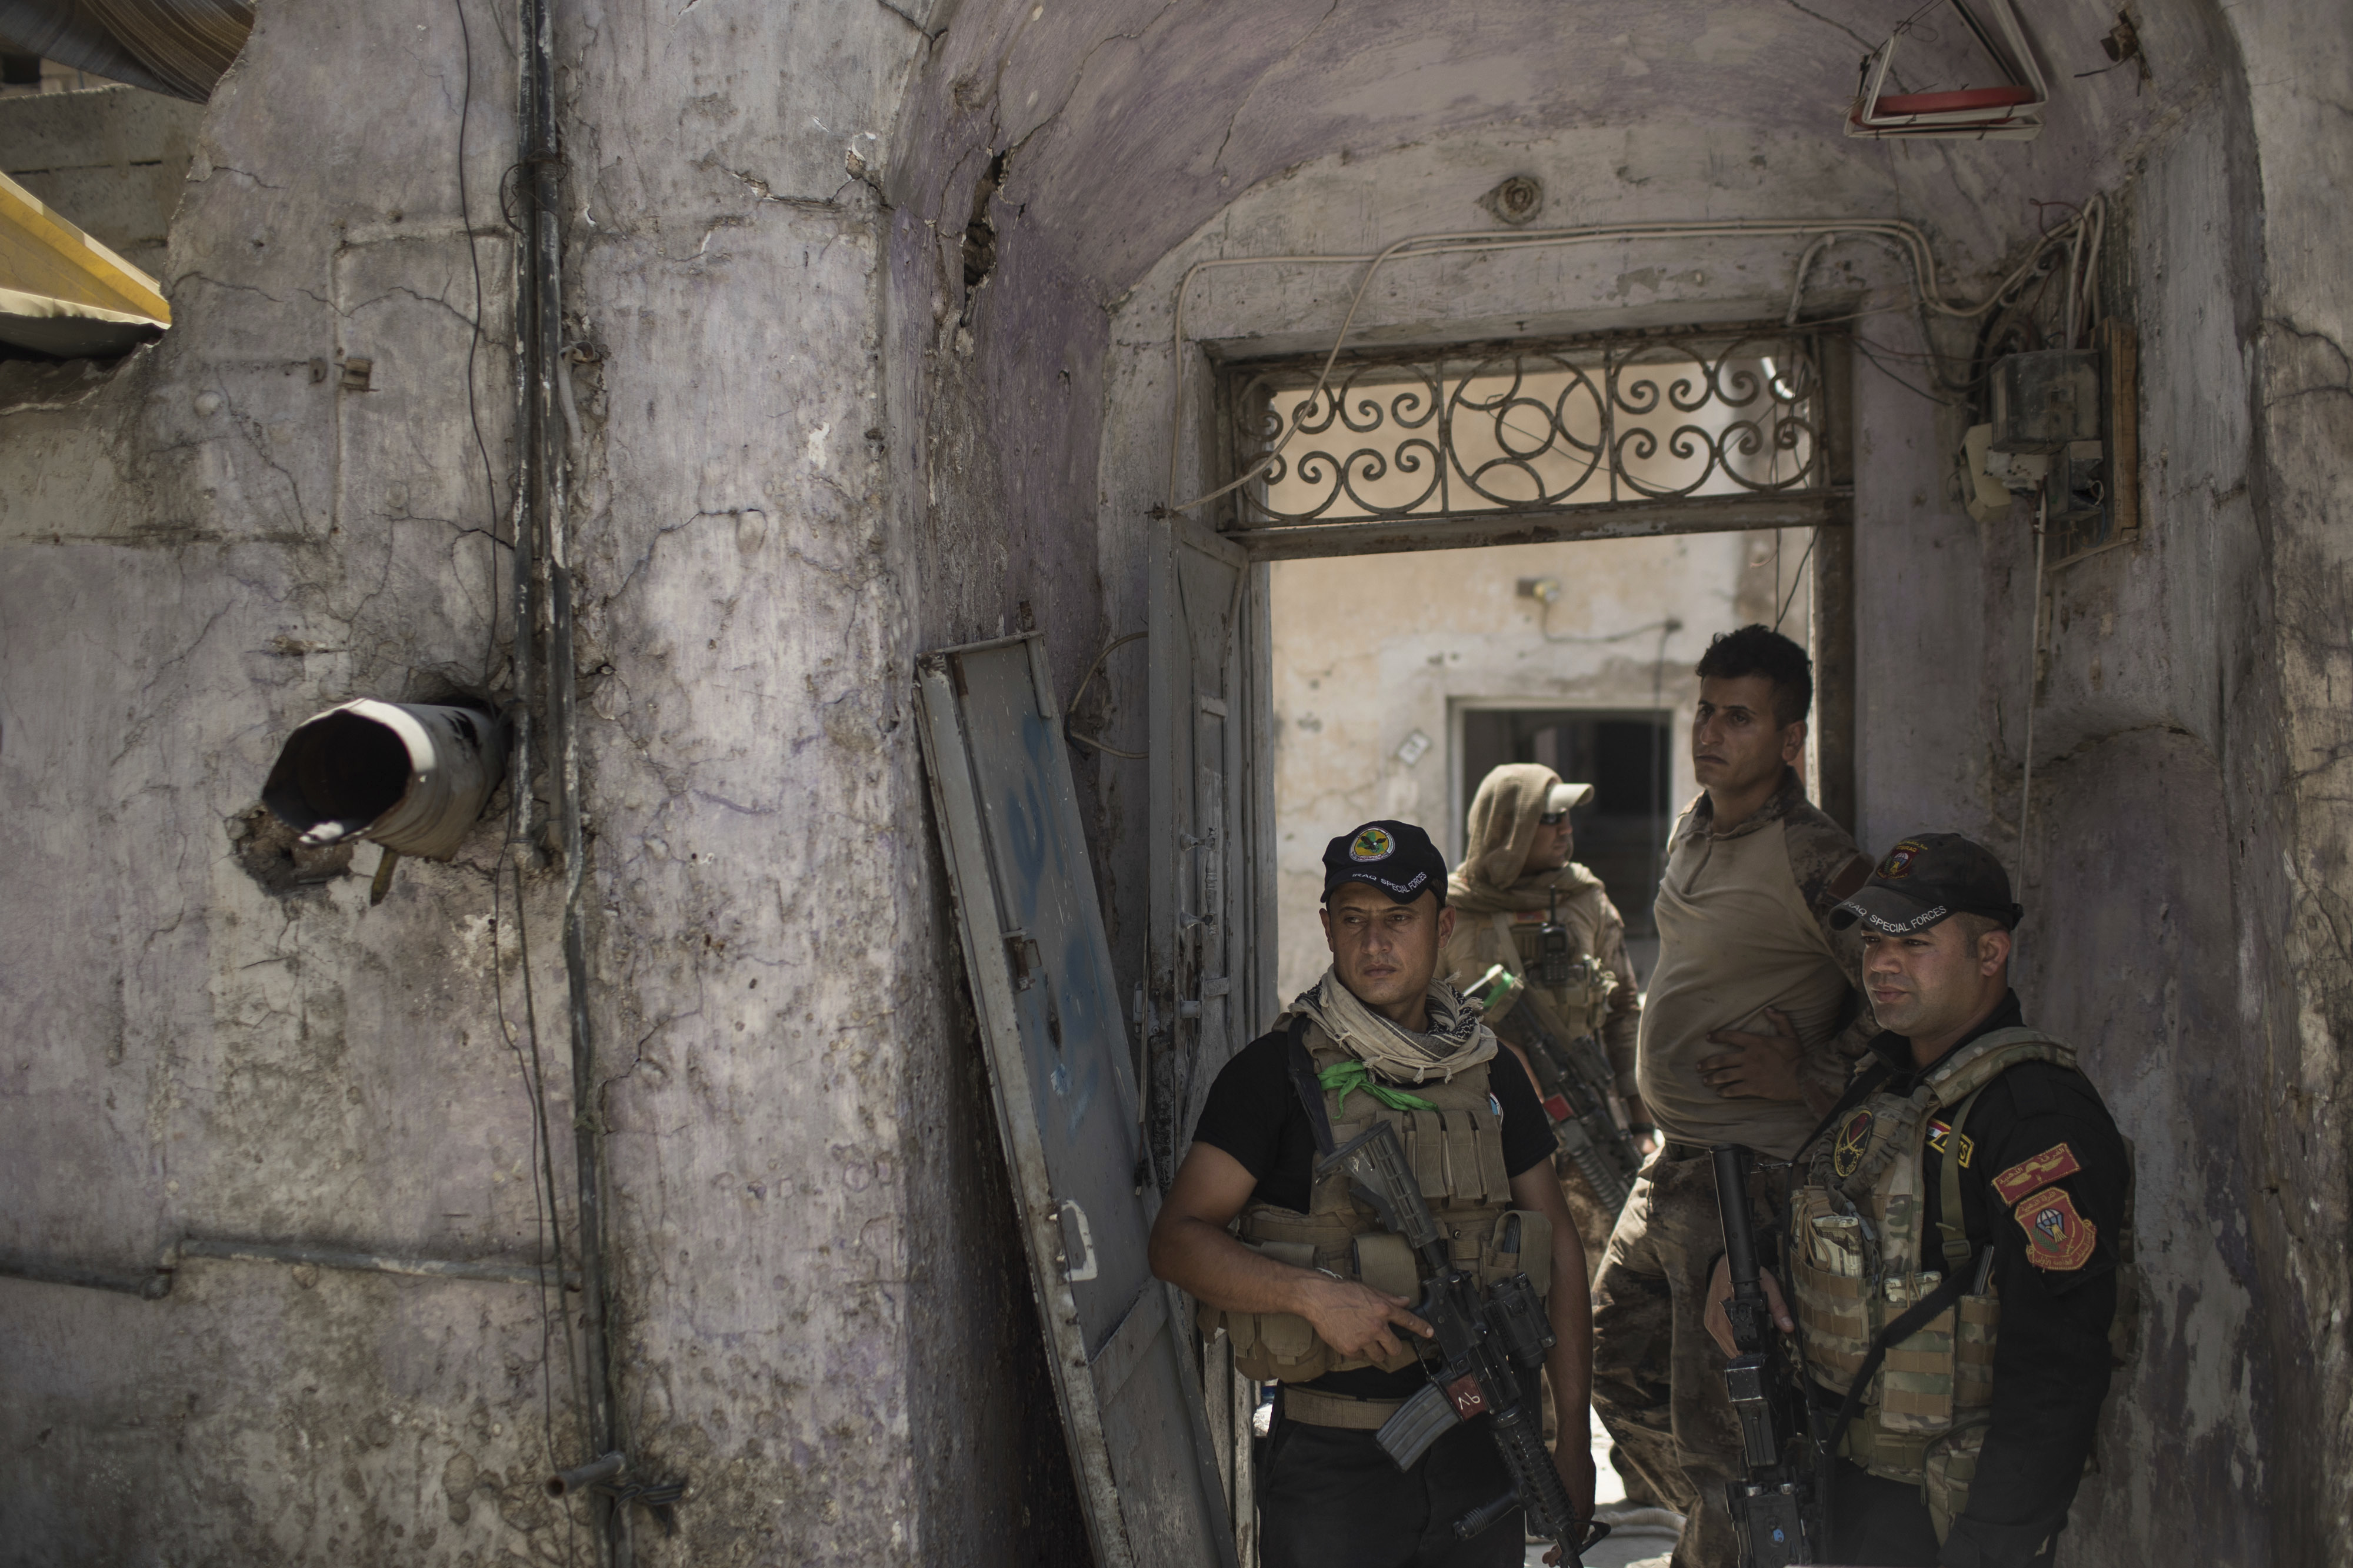 Iraqi special forces soldiers stand in a house retaken by Iraqi forces during fighting against Islamic State militants in the Old City of Mosul, Iraq, Tuesday, June 27, 2017. An Iraqi officer says counterattacks by Islamic State militants on the western edge of Mosul have stalled Iraqi forces' push in the Old City _ the last IS stronghold in the city. (AP Photo/Felipe Dana)